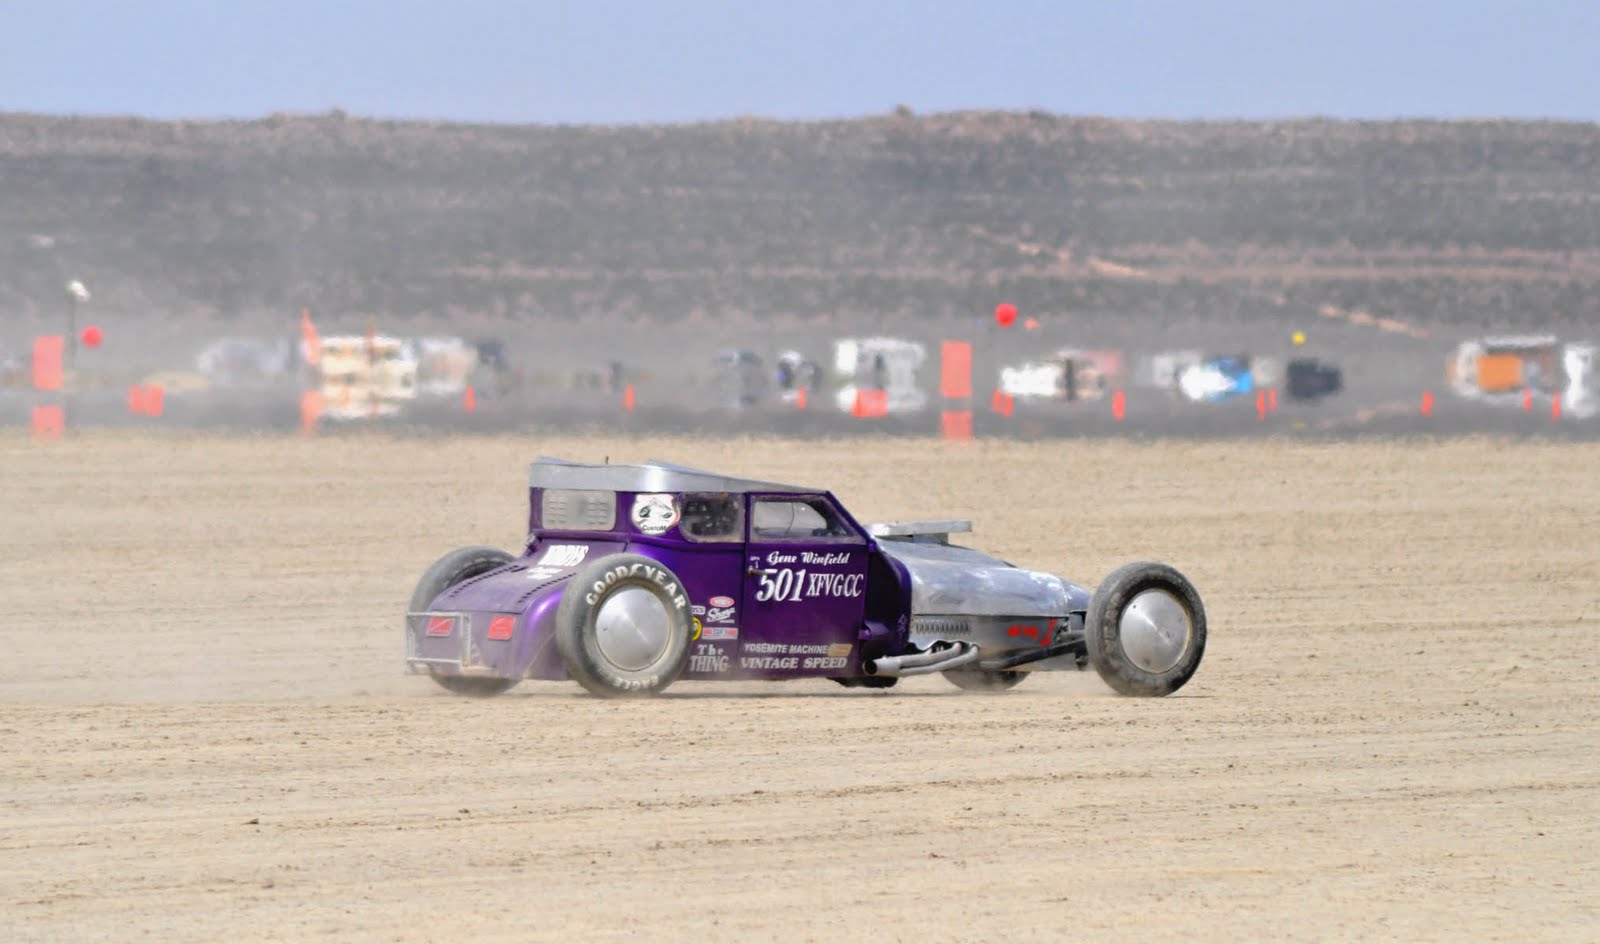 Just A Car Guy: May 14 2011 at El Mirage, dry lakes racing from start to  finish in a glance